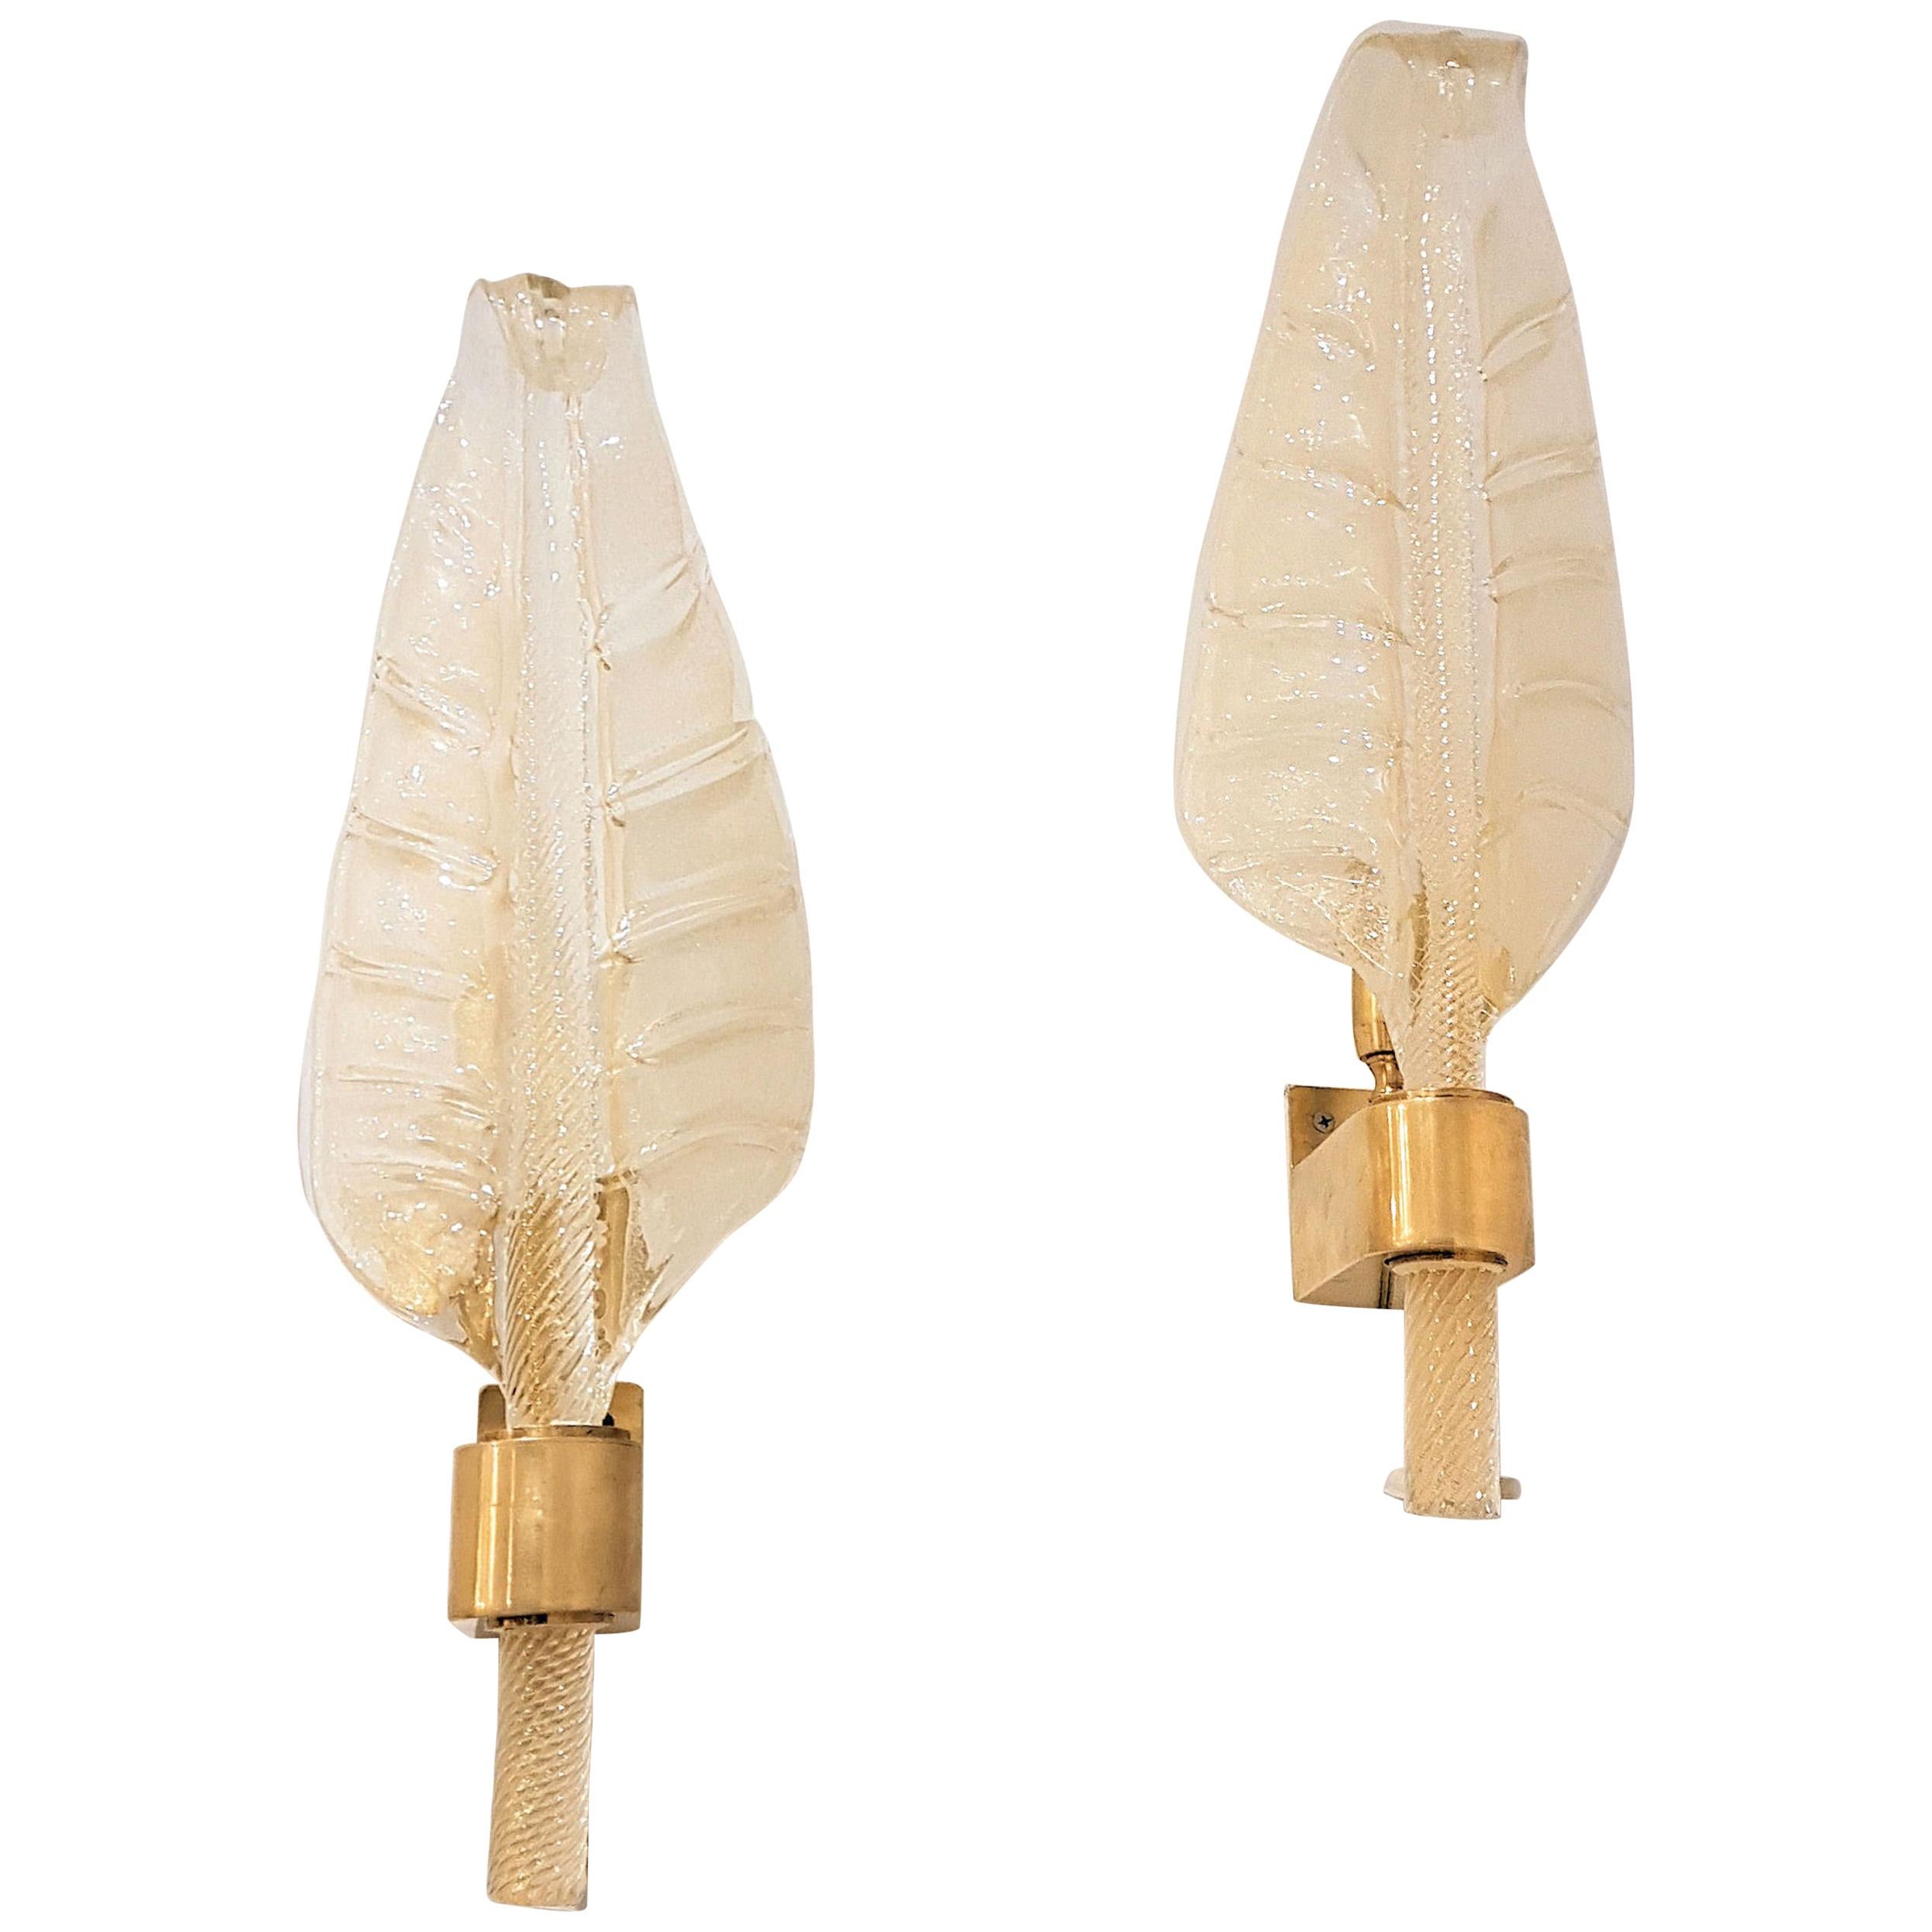 Two Pairs of Gold Murano Glass Leaf Sconces, Barovier Style, Mid-Century Modern